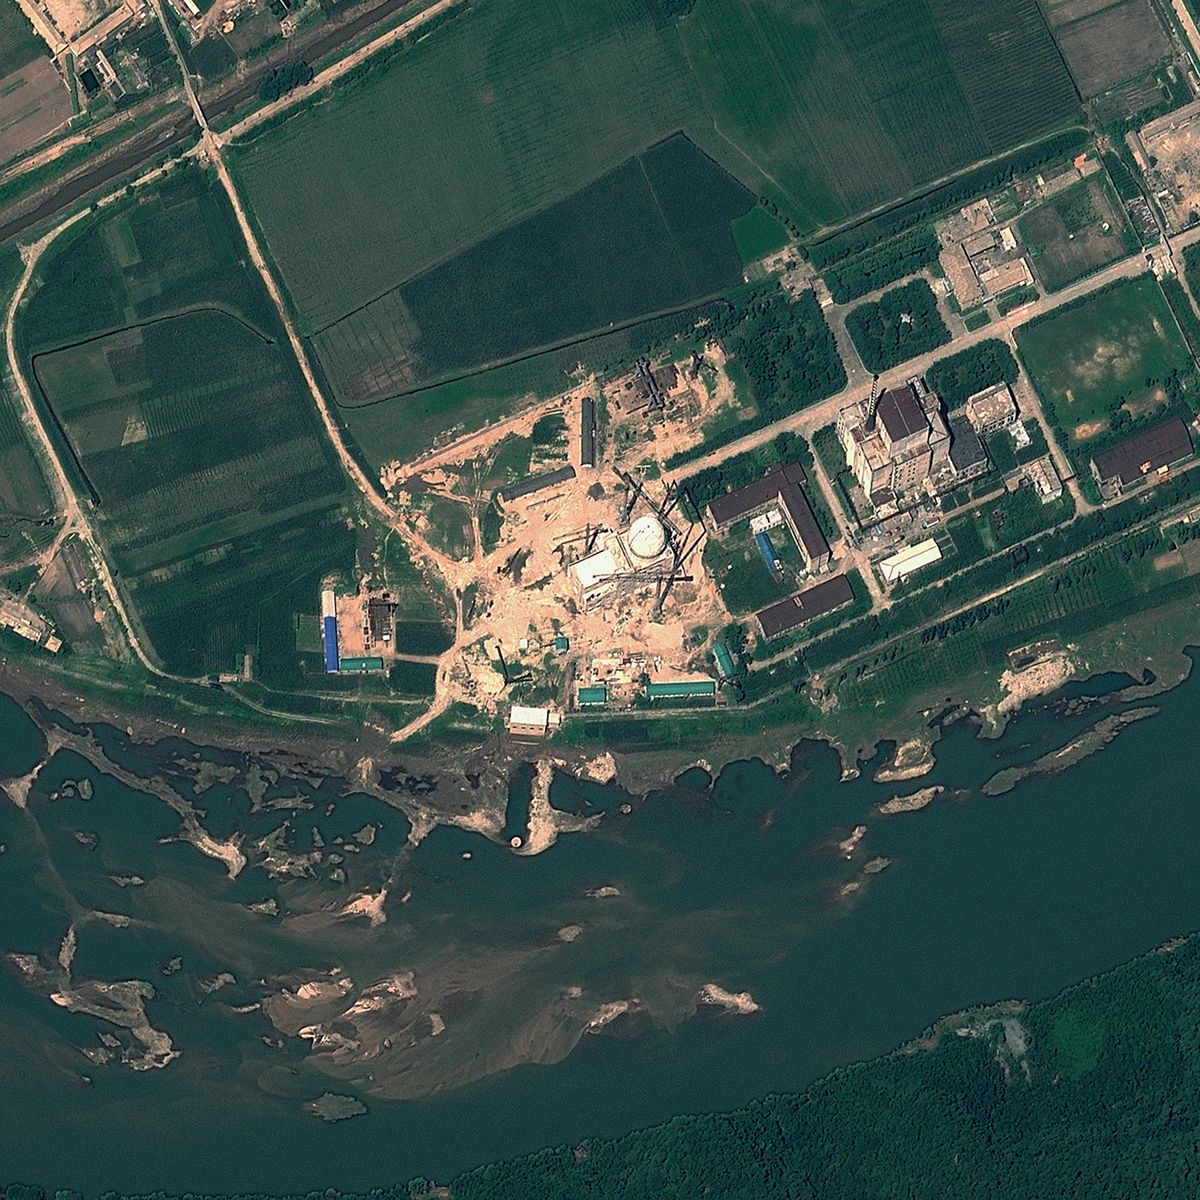 This Agust 6, 2012 satellite image provide by GeoEye on August 22, 2012 shows the Yongbyon Nuclear Scientific Research Centre in North Korea. North Korea has put a dome on a light-water reactor it is building, a key step towards completing a plant that could be used to support its nuclear weapons program.    AFP PHOTO/HANDOUT/"GeoEye Satellite Image"           = RESTRICTED TO EDITORIAL USE - MANDATORY CREDIT " AFP PHOTO / GeoEye Satellite Image " - NO MARKETING NO ADVERTISING CAMPAIGNS - DISTRIBUTED AS A SERVICE TO CLIENTS = (Photo by HO / GeoEye Satellite Image / AFP)